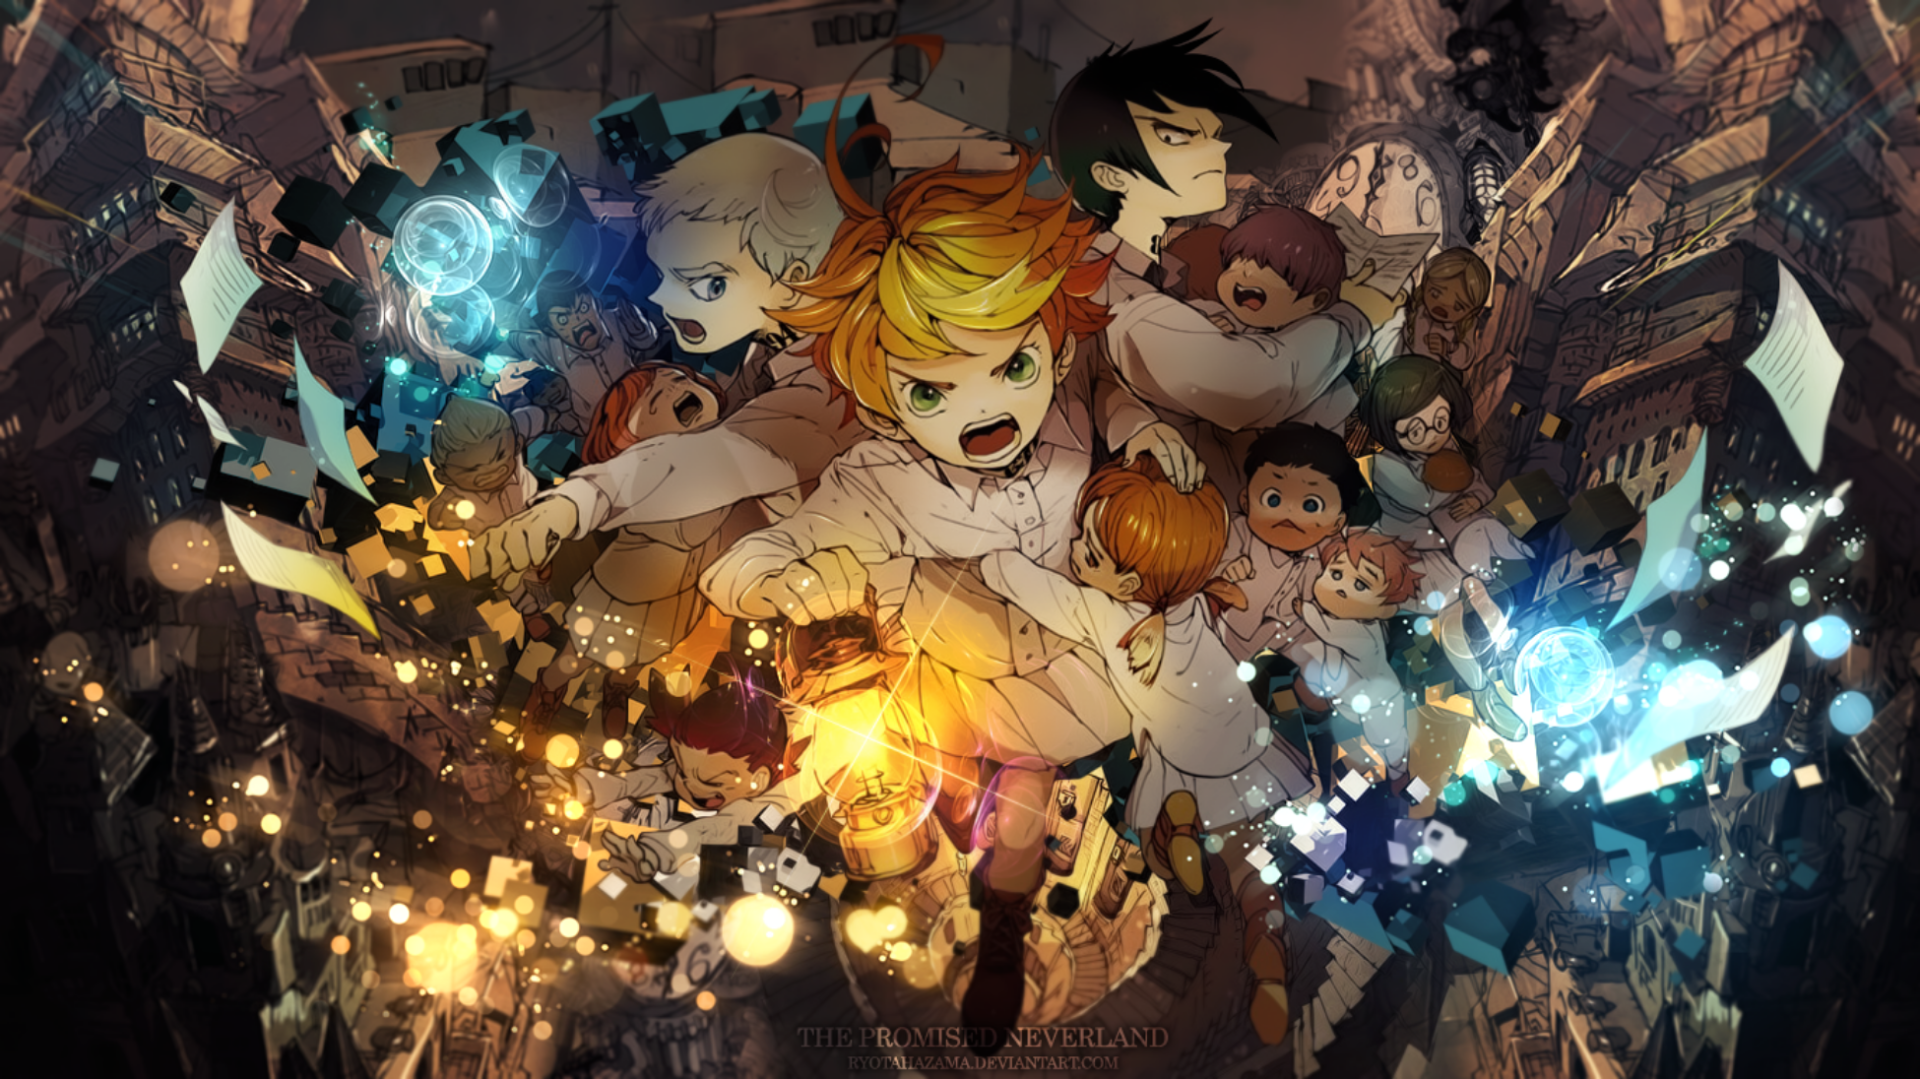 The Promised Neverland Series Gets Game App - News - Anime News Network